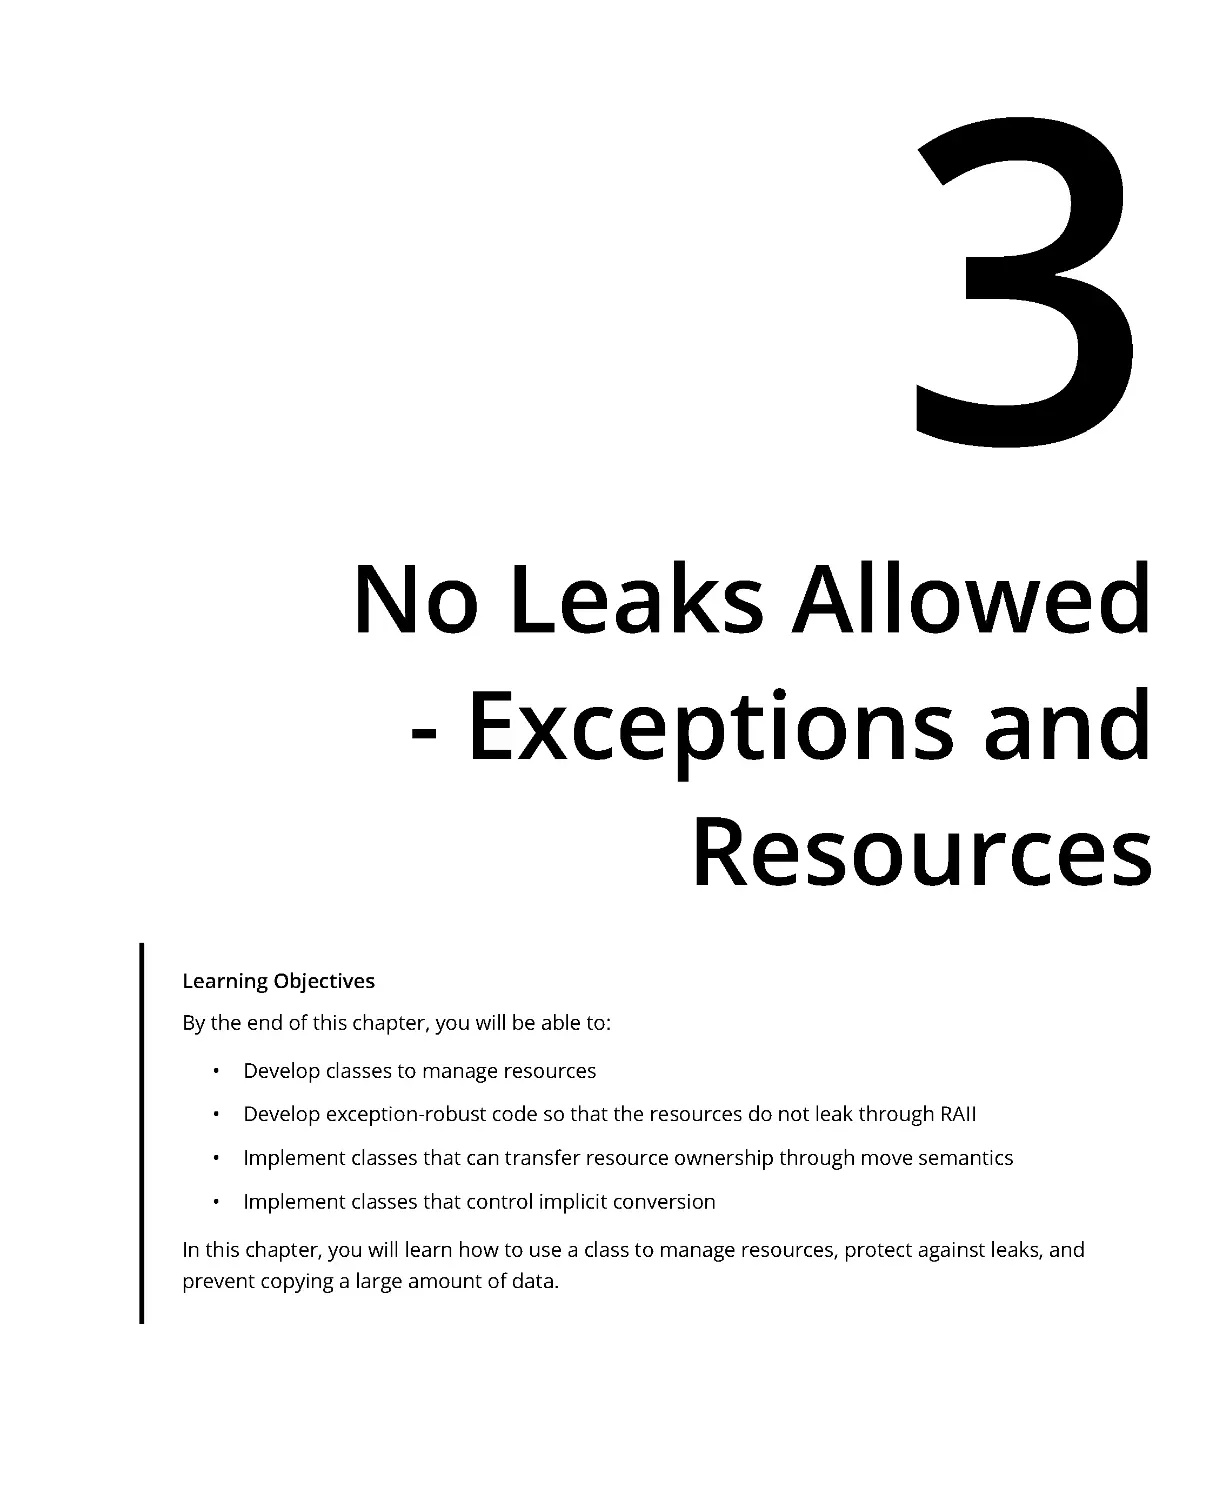 Chapter 3: No Leaks Allowed - Exceptions and Resources